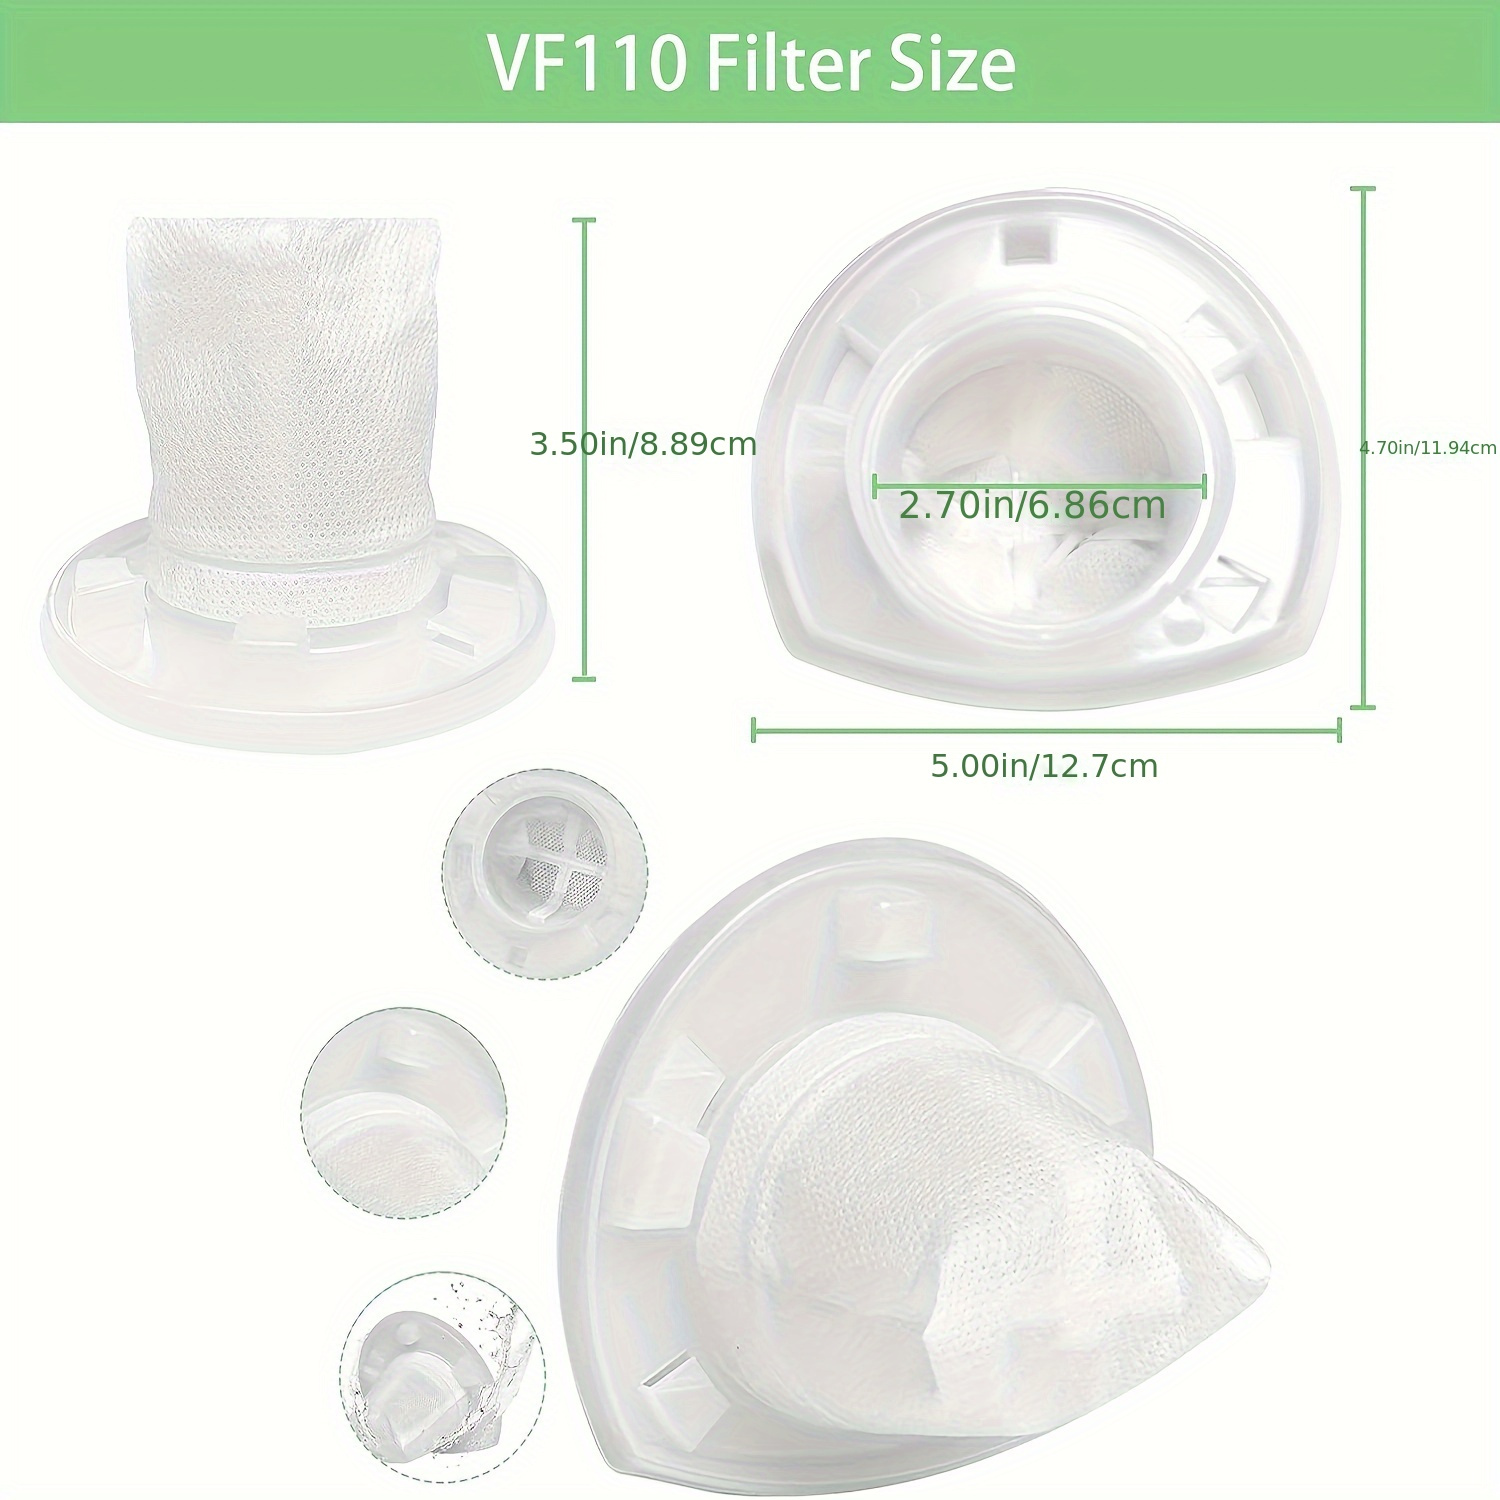 Black & Decker Vf110 Dustbuster Replacement Filters 2-Pack